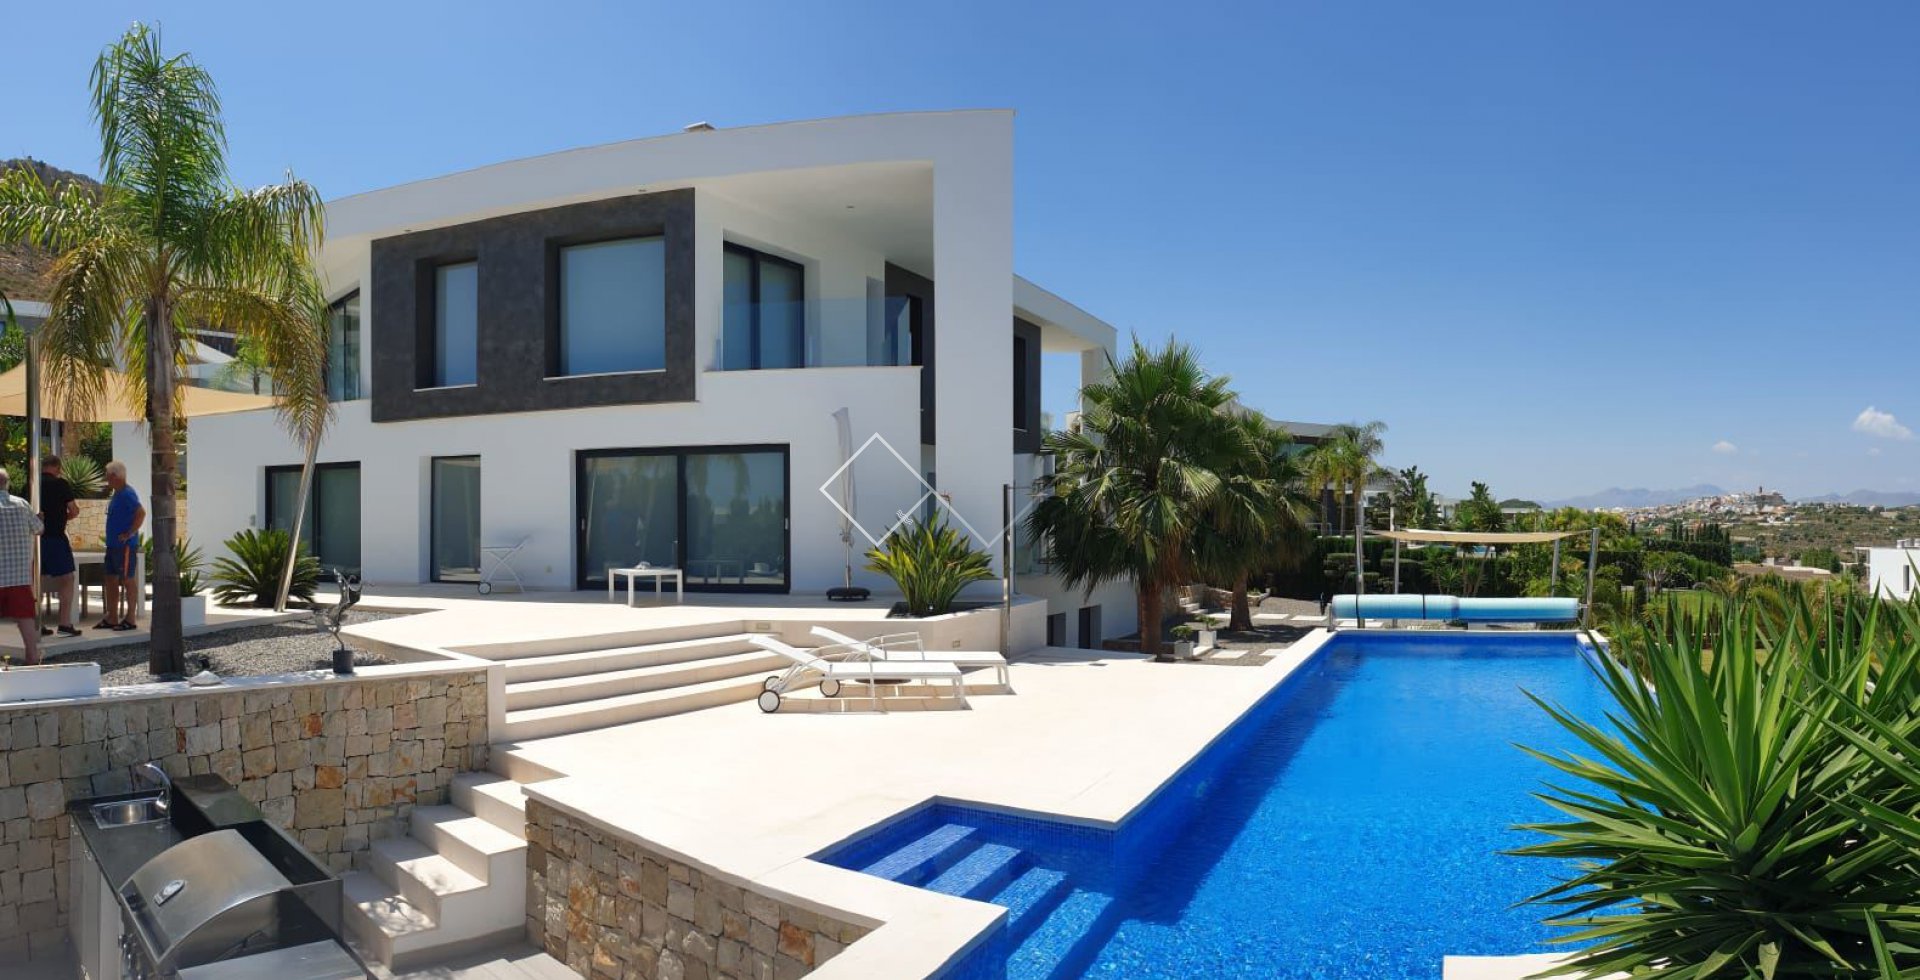 -pool and house  luxurious modern villa with pool and sea views in Javea